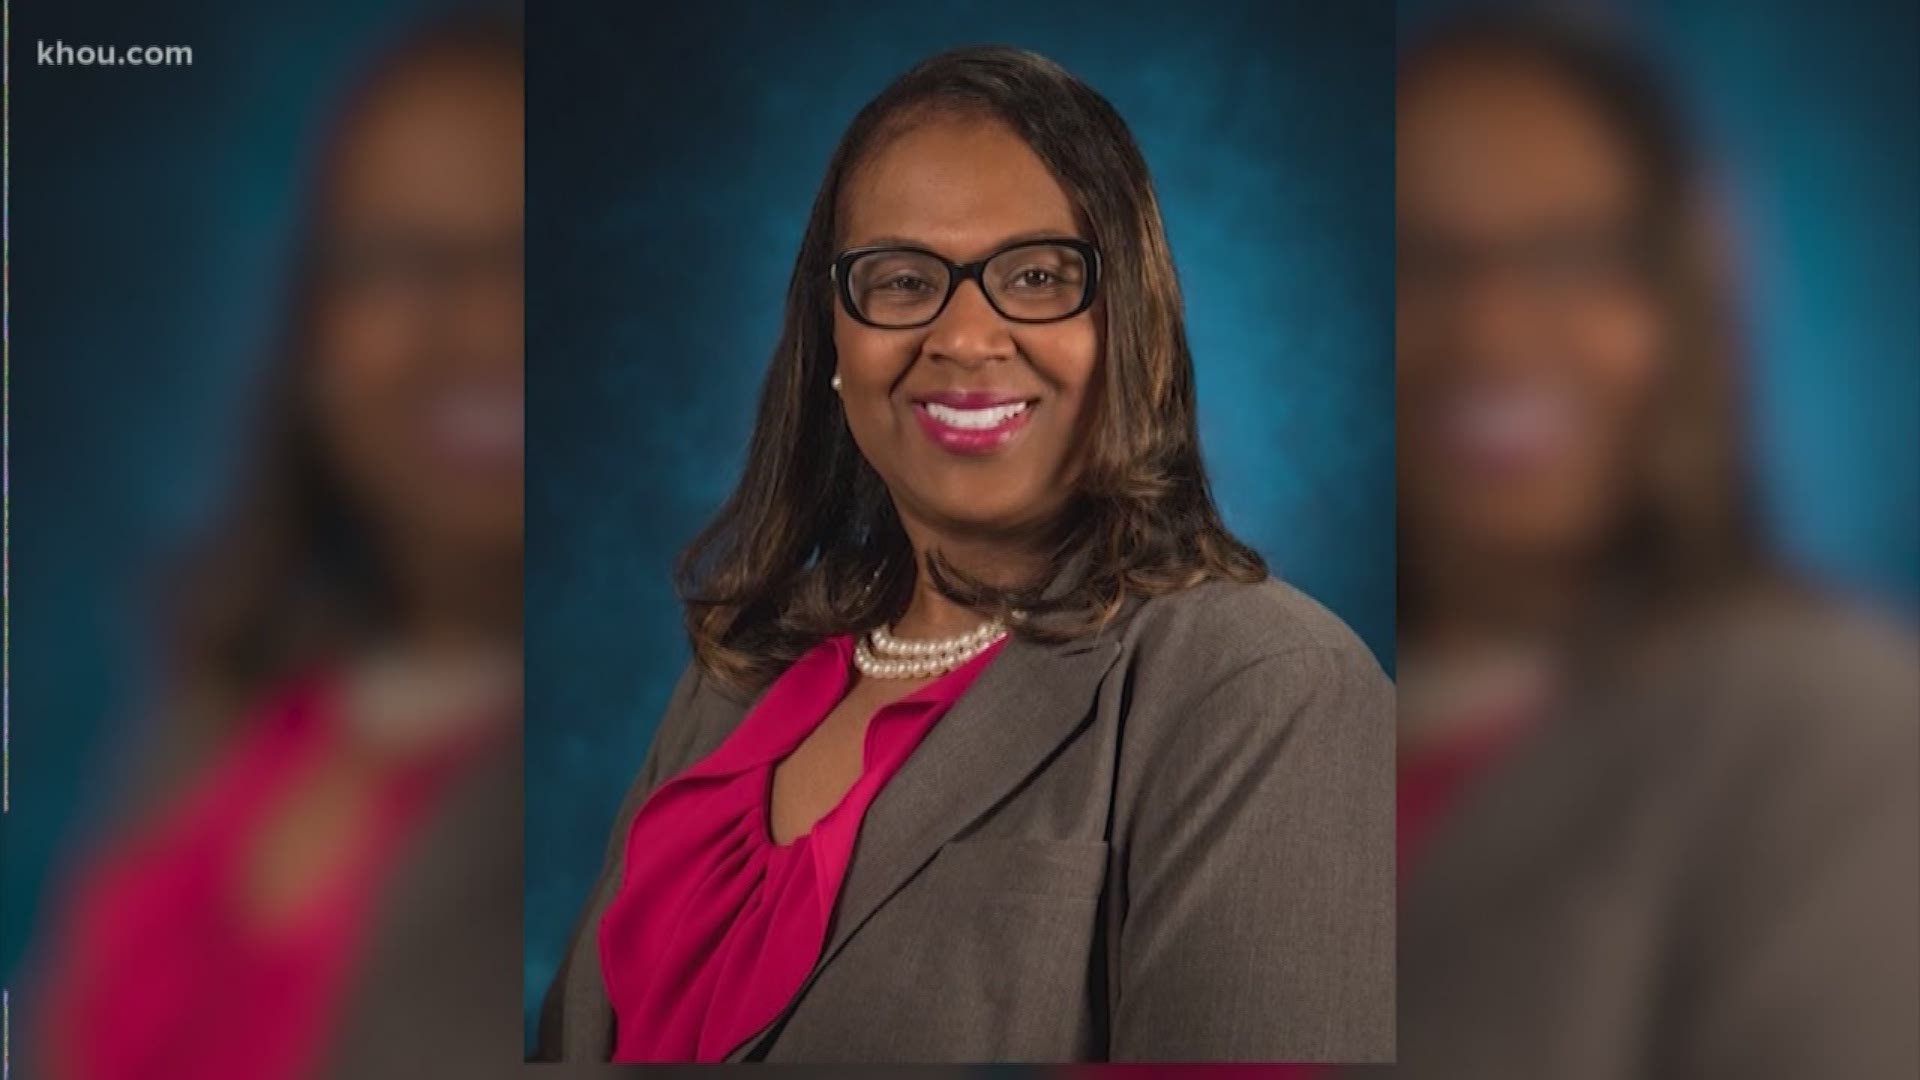 The Houston ISD school board voted 5-4 Thursday night to replace interim superintendent Grenita Lathan and replace her with former superintendent Abe Saavedra.